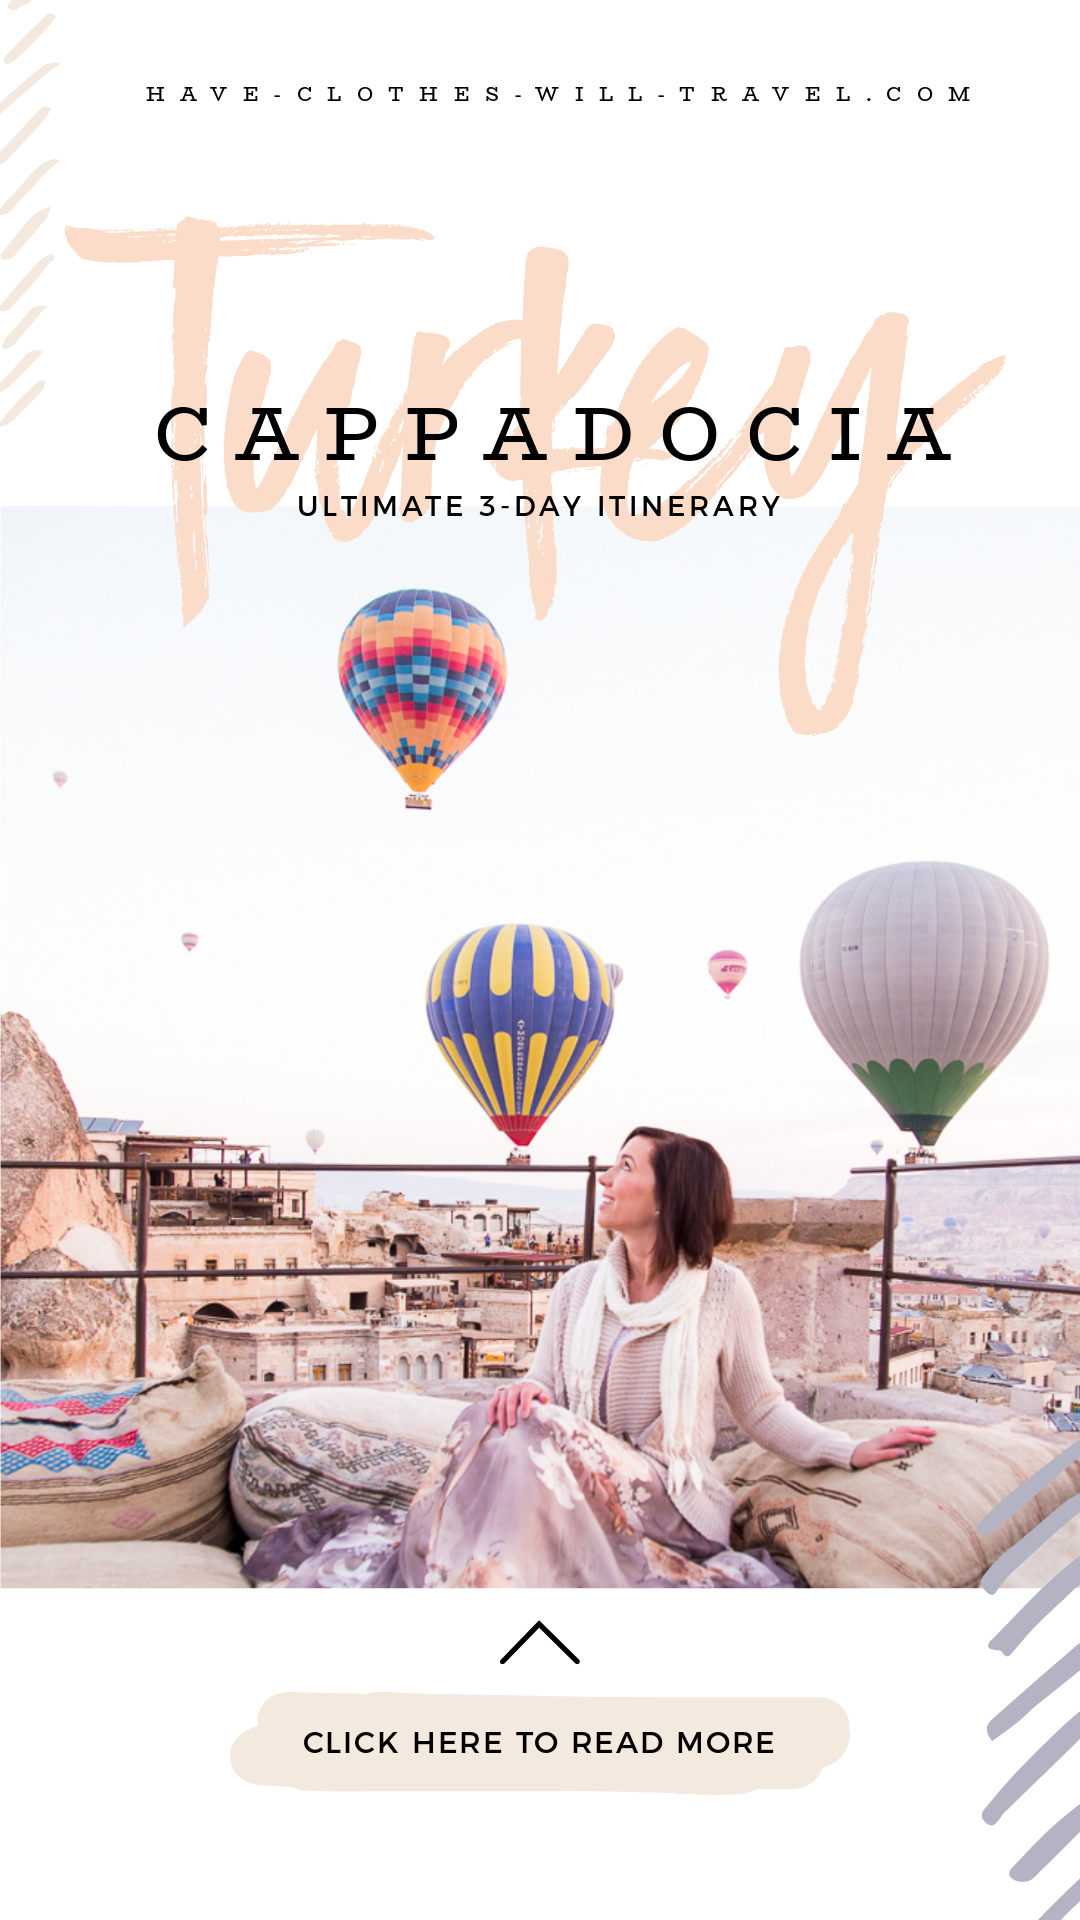 How to Spend 3 Days in Cappadocia, Turkey - The Ultimate Itinerary